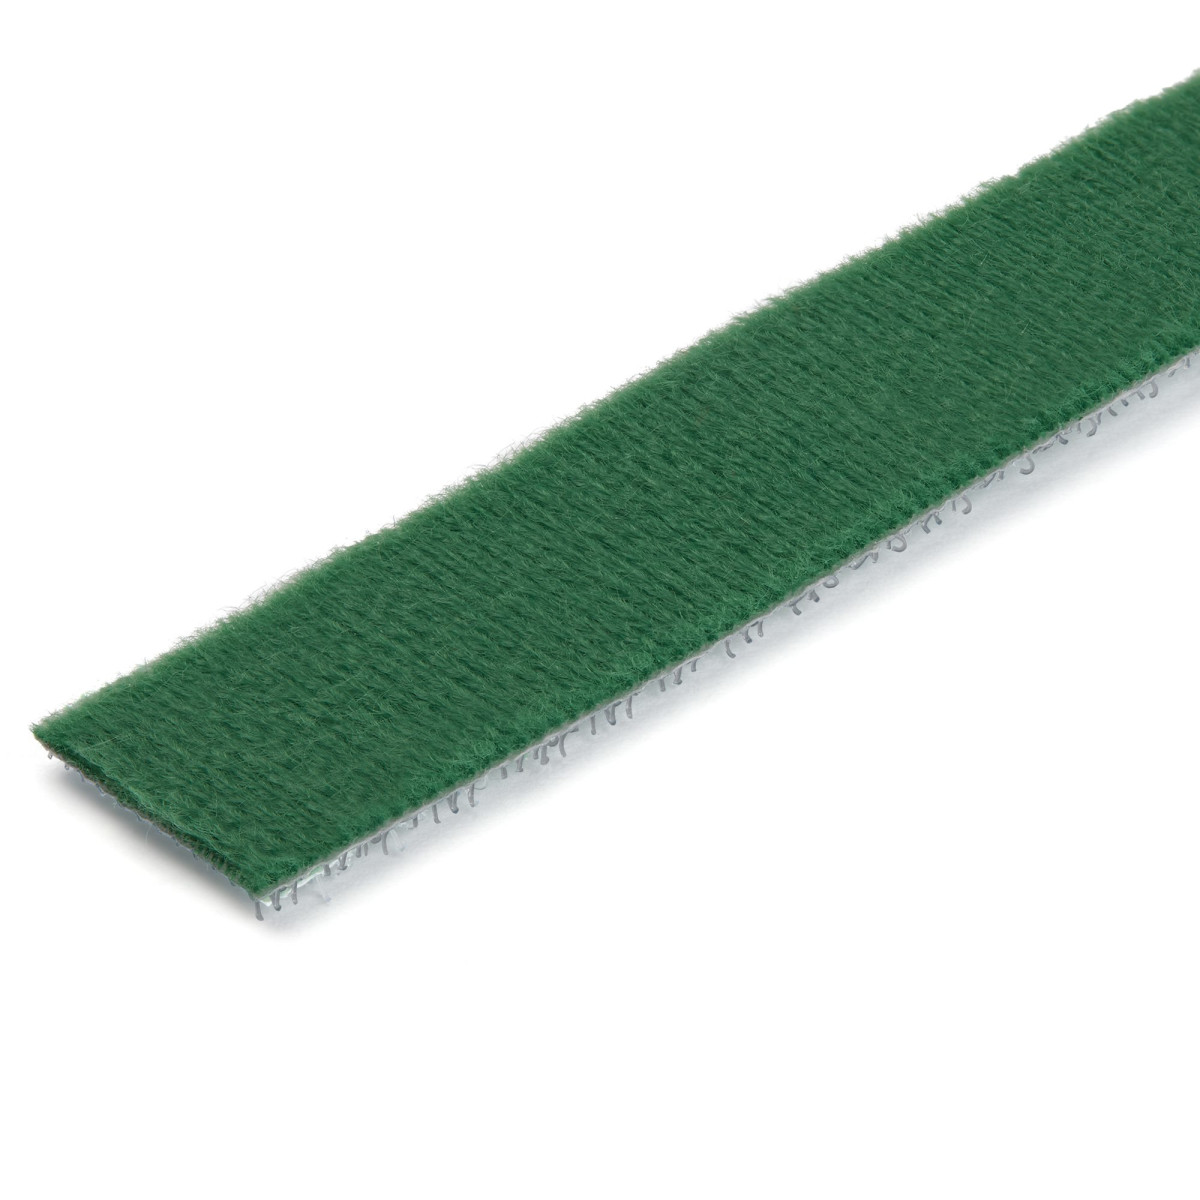 Cable - Hook and Loop - 100ft. - Green